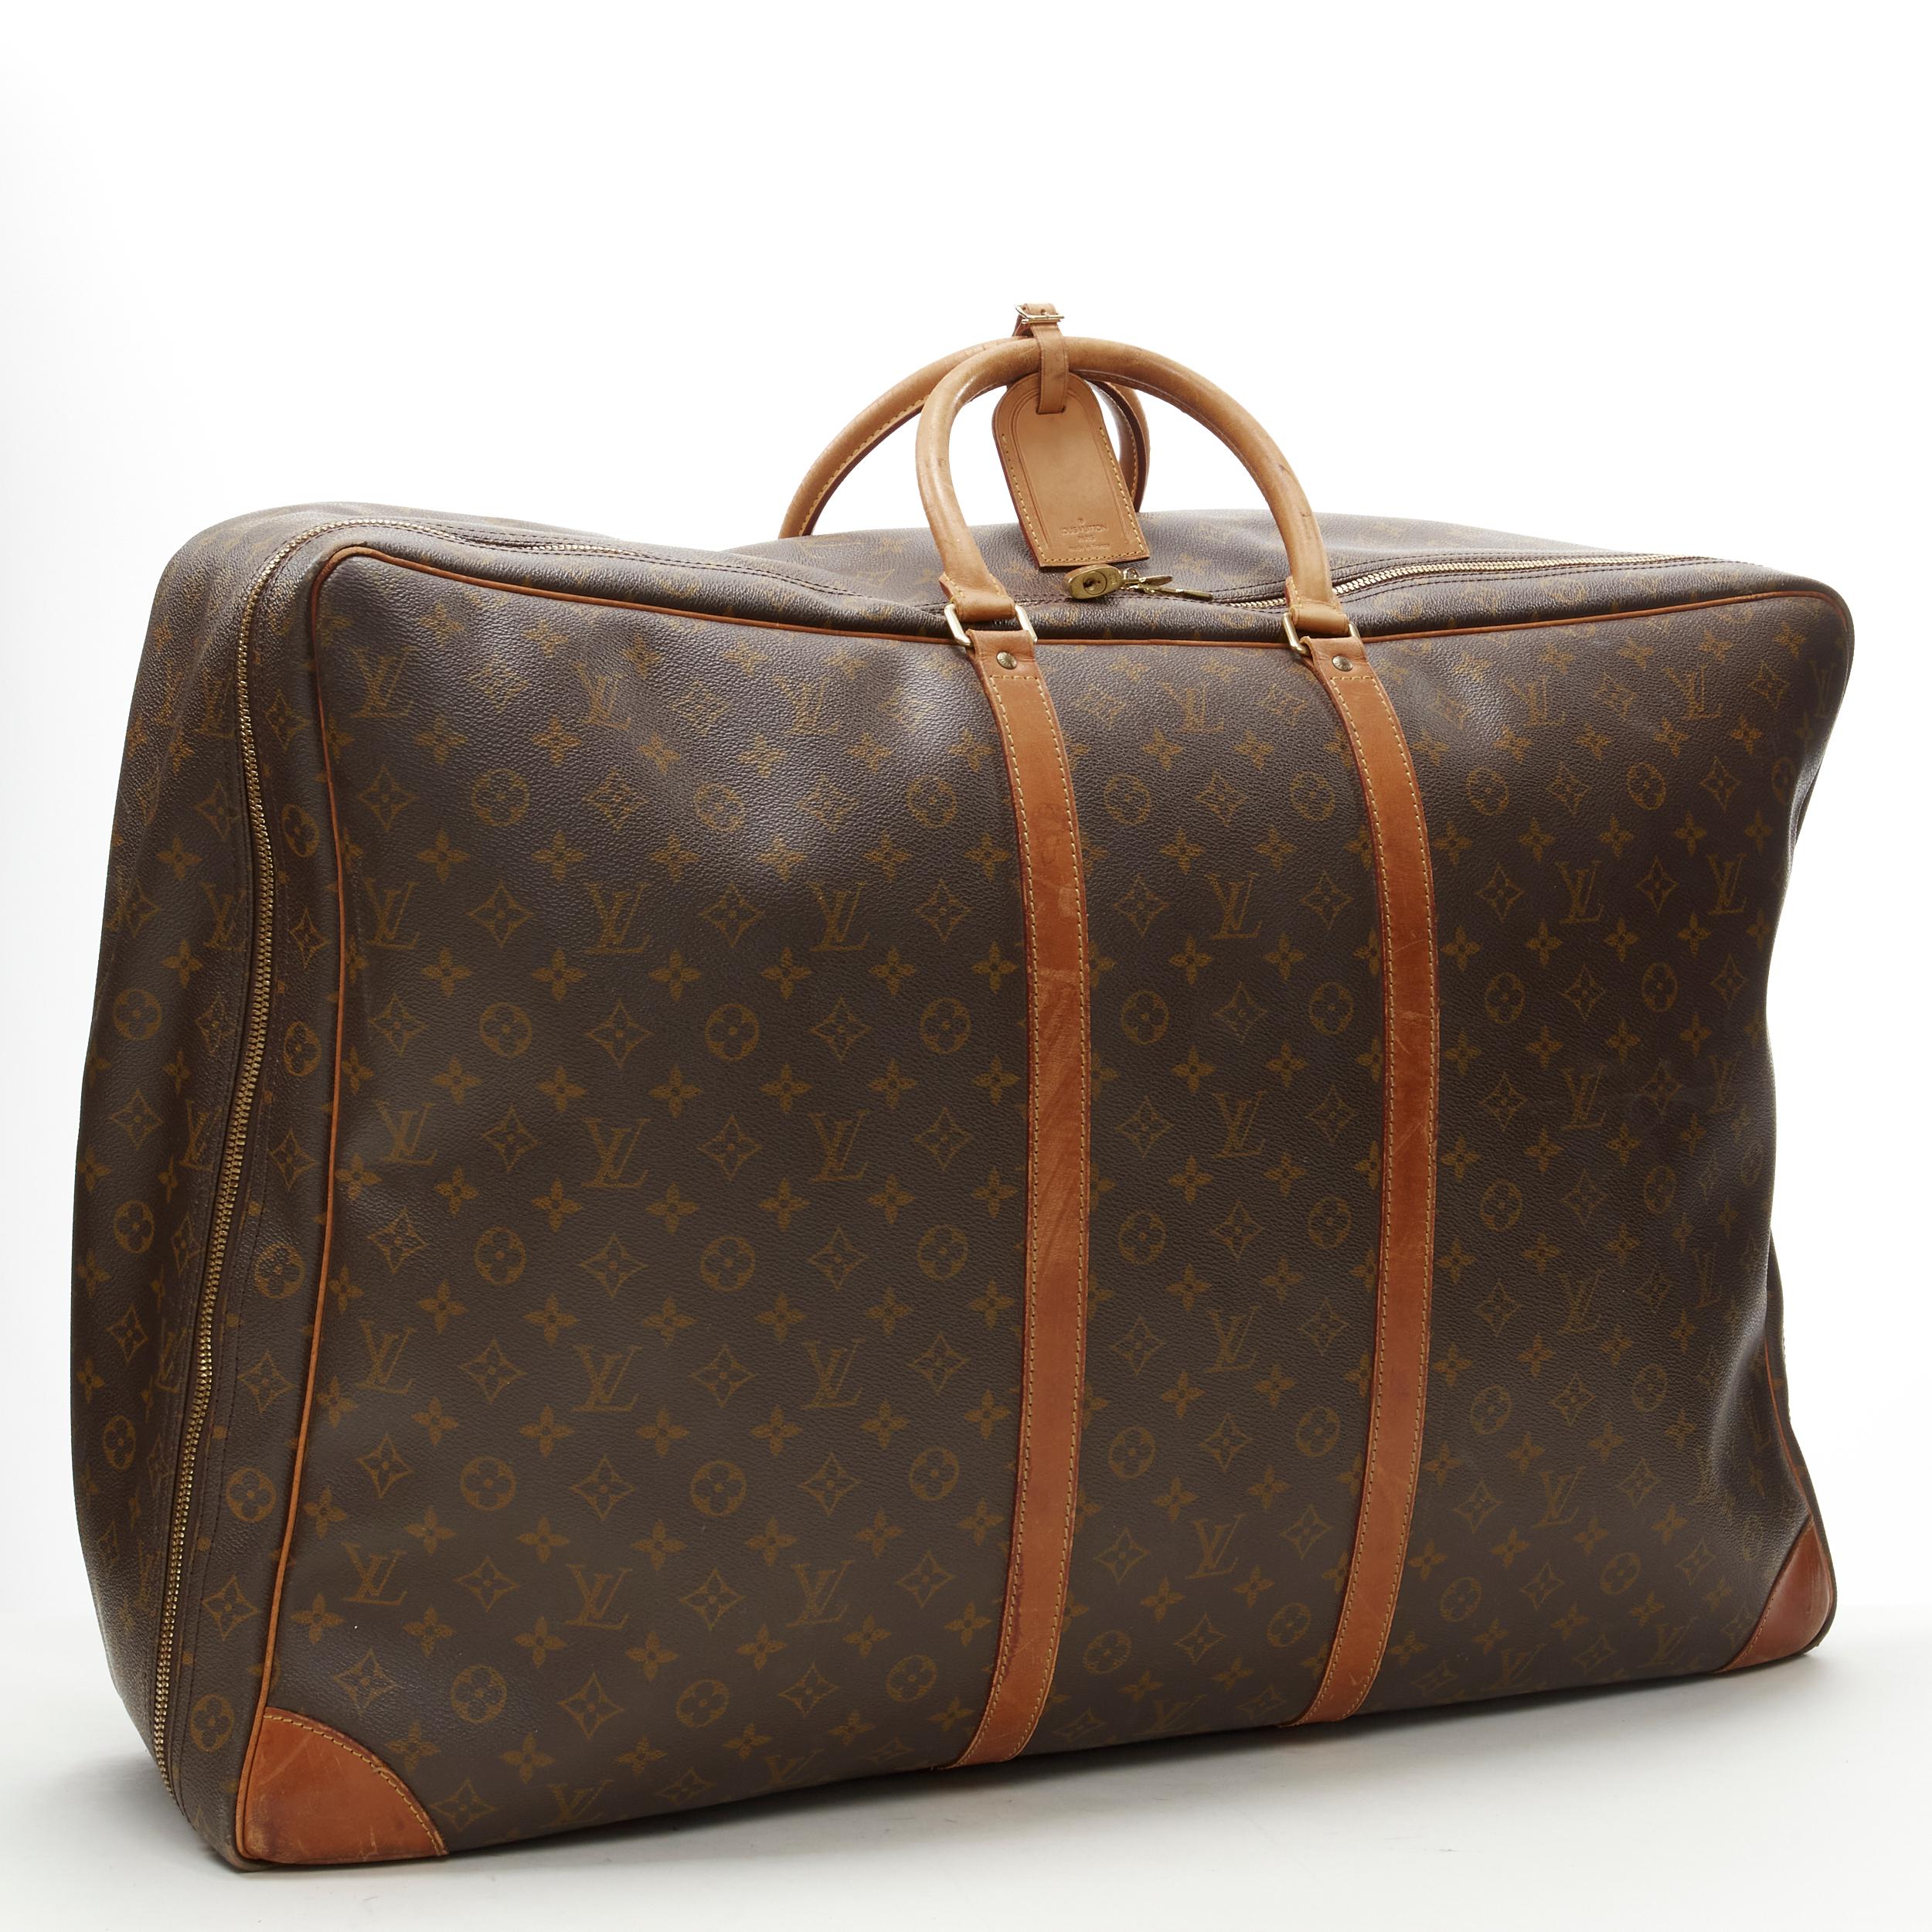 LOUIS VUITTON Sirius 70 brown LV monogram canvas large travel bag
Reference: AEMA/A00080
Brand: Louis Vuitton
Model: Sirius 70
Material: Canvas, Leather
Color: Brown, Beige
Pattern: Monogram
Closure: Zip
Lining: Beige Fabric
Extra Details: LV logo